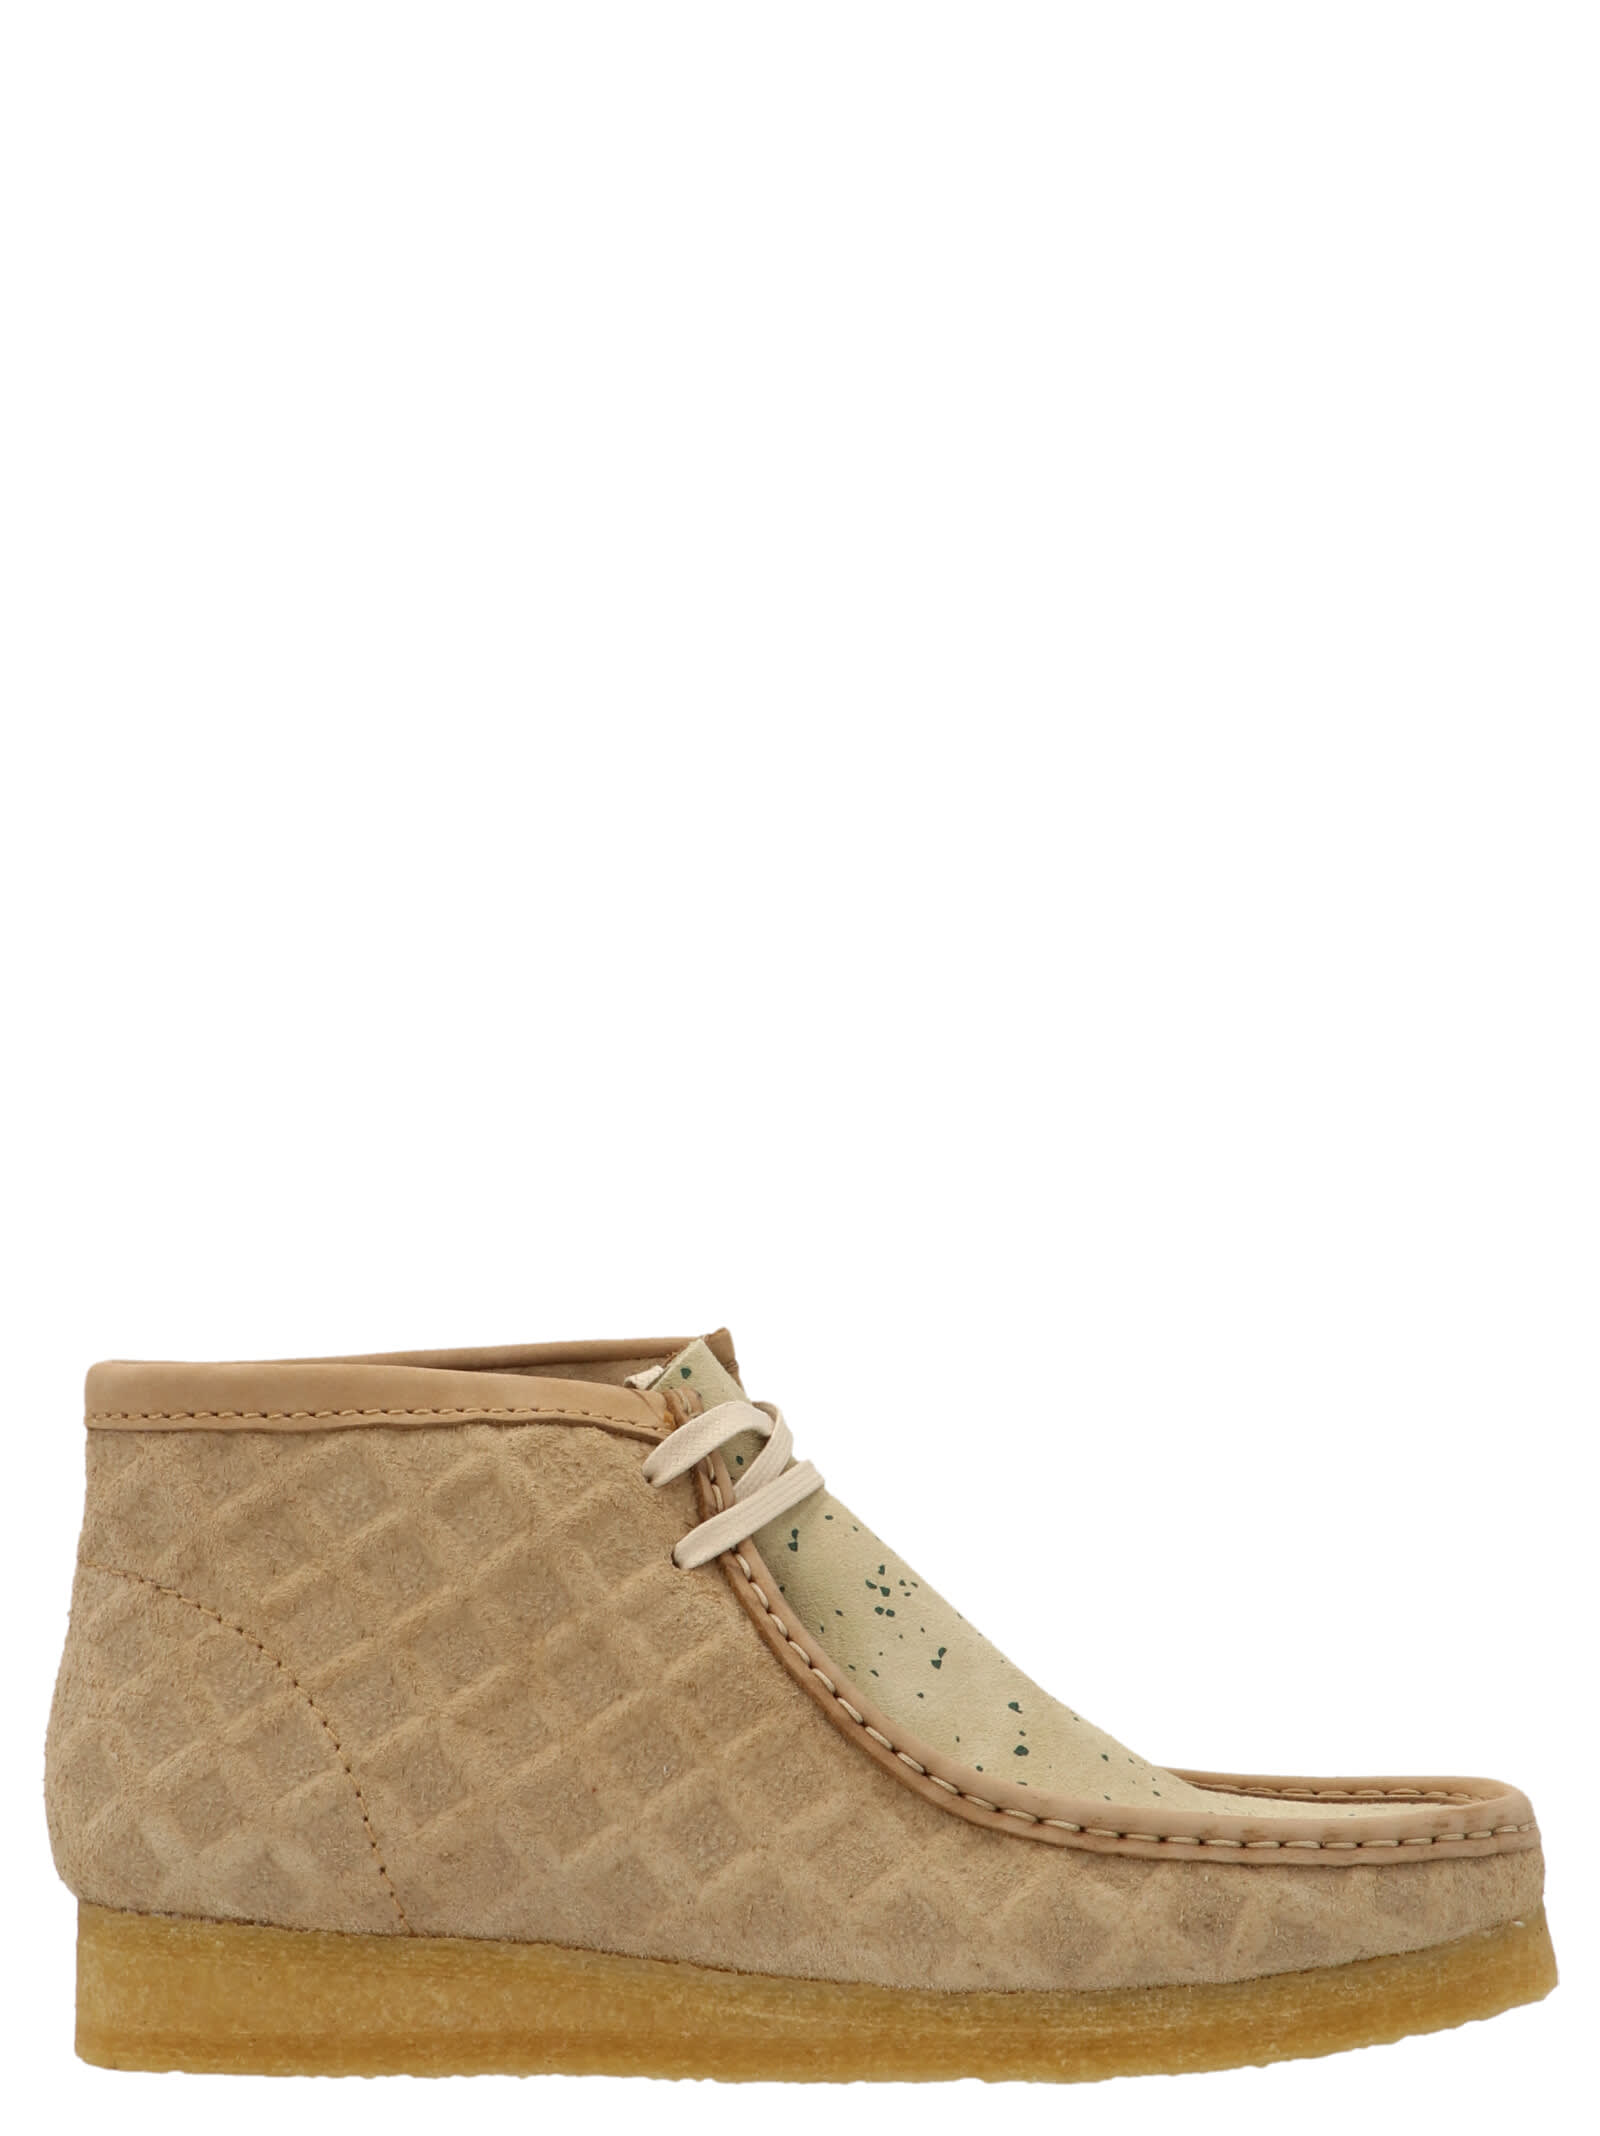 Clarks Originals X Sweet Checks wallabee Ankle Boot